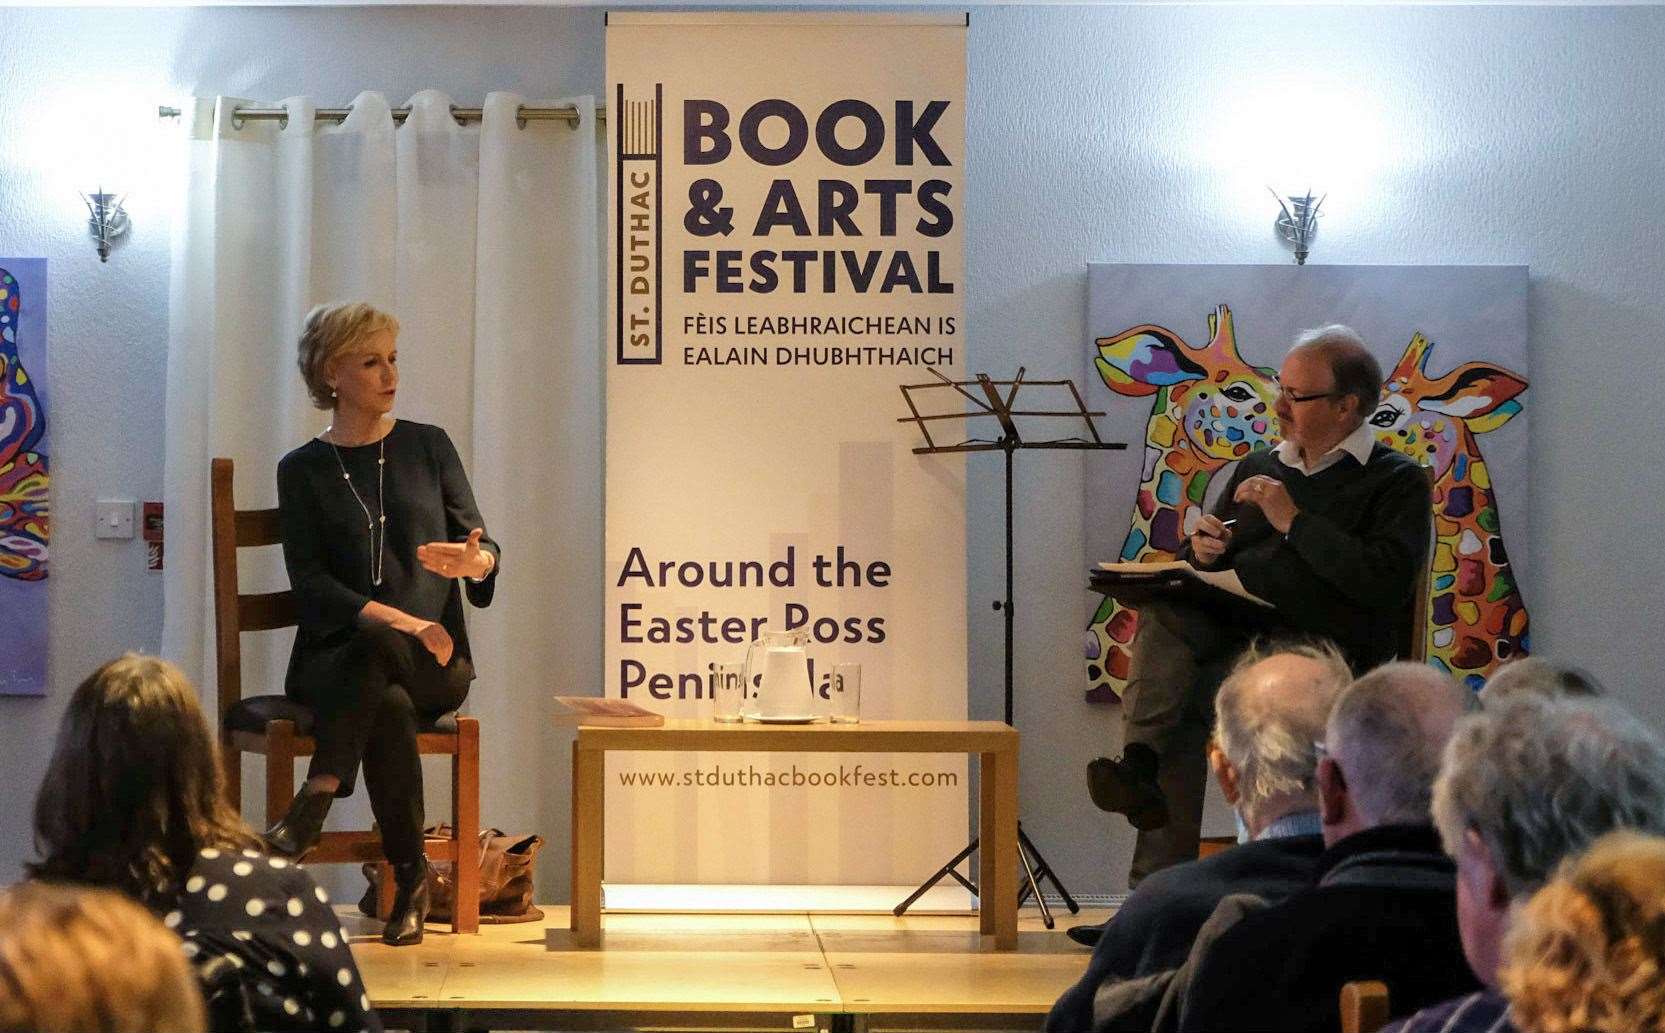 Sally Magnusson was introduced by Stuart Fernie at St Duthac Book and Arts Festival last Monday. Picture: Mark Janes